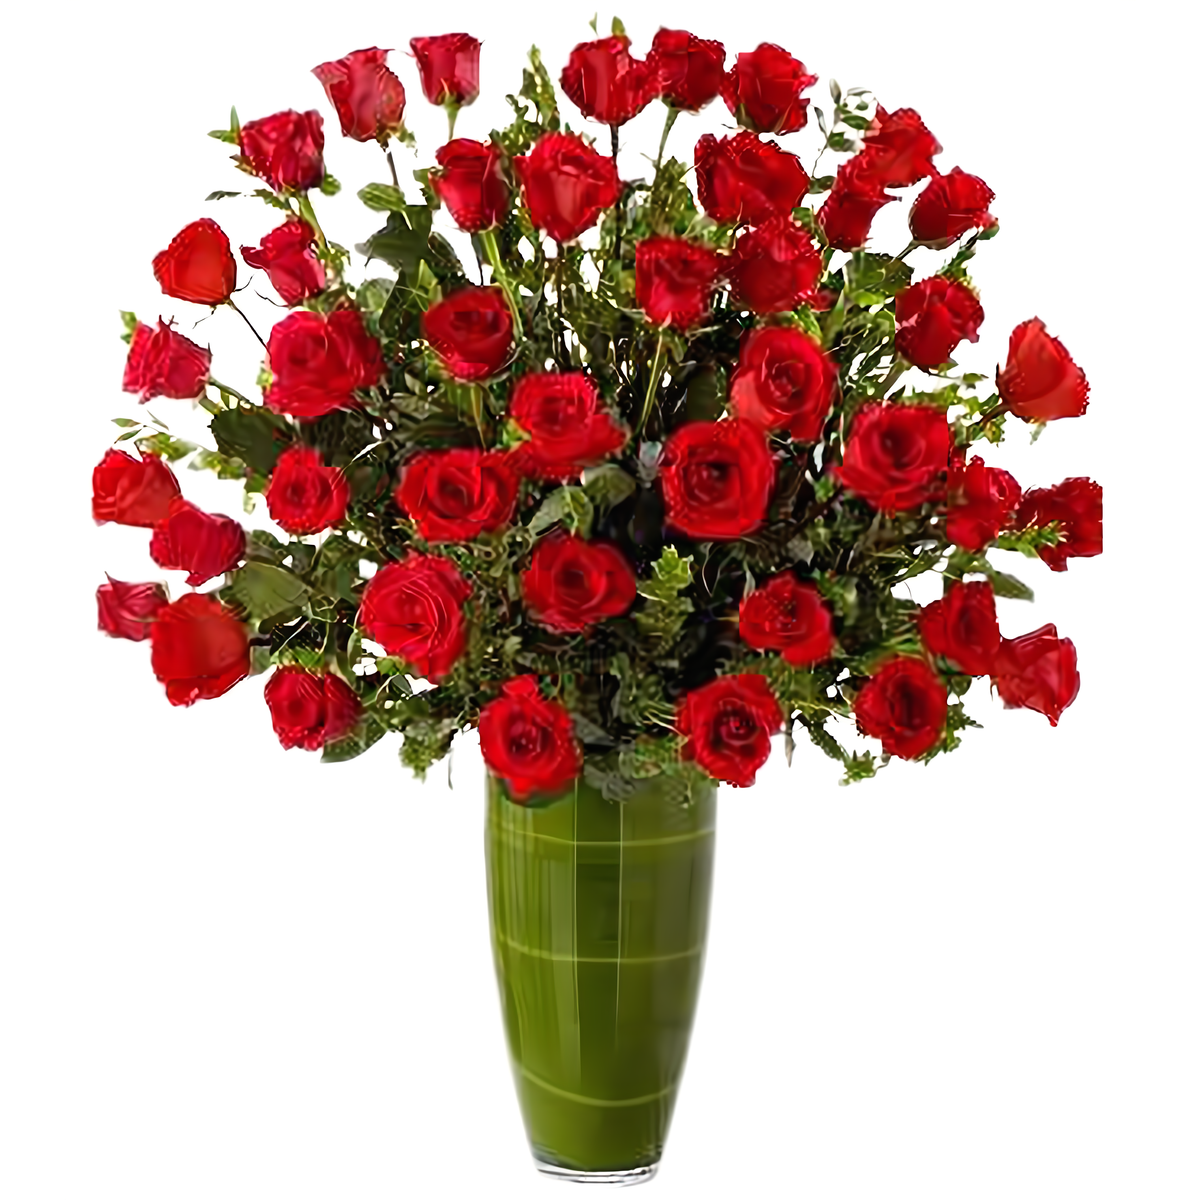 Queens Flower Delivery - Luxury Rose Bouquet - 24 Premium Red Long-Stem Roses